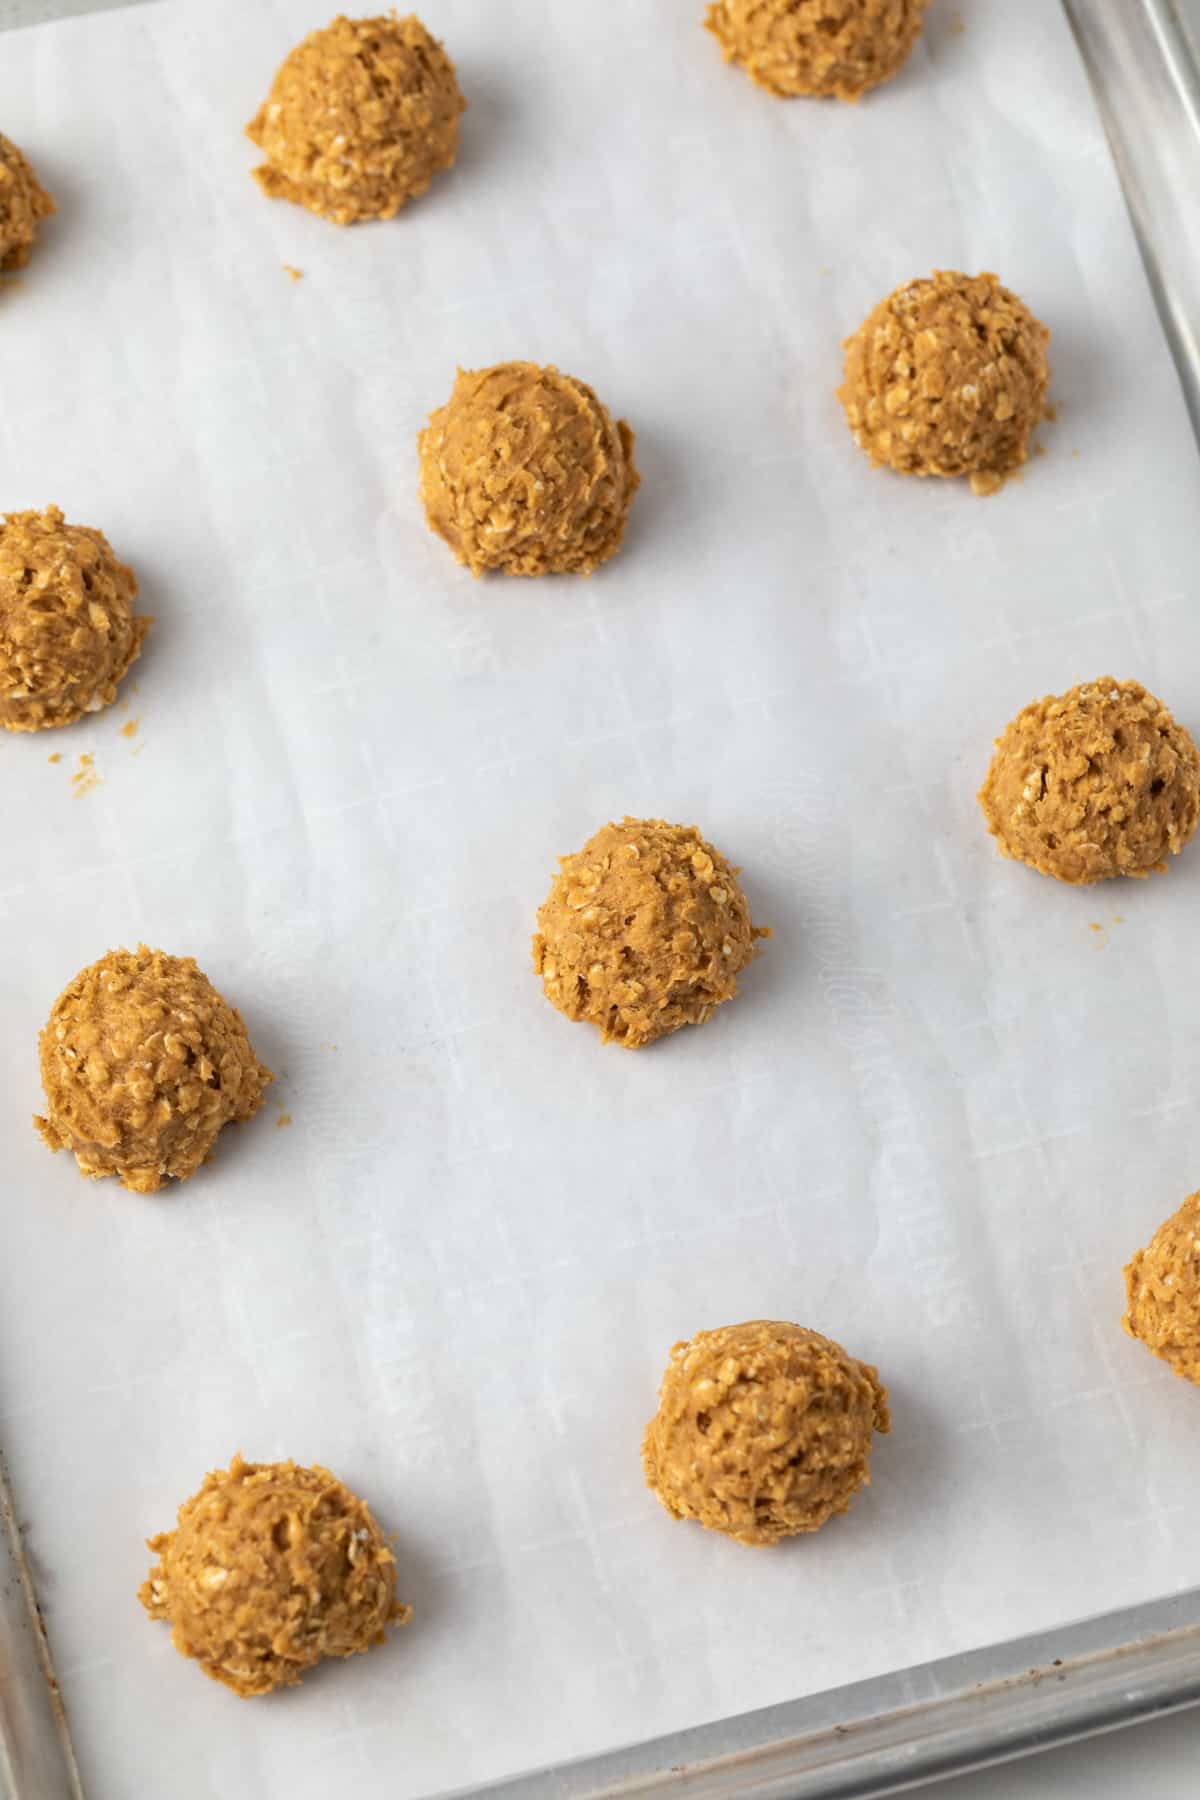 Unbaked pumpkin oatmeal cookie dough balls on baking sheet lined with parchment paper